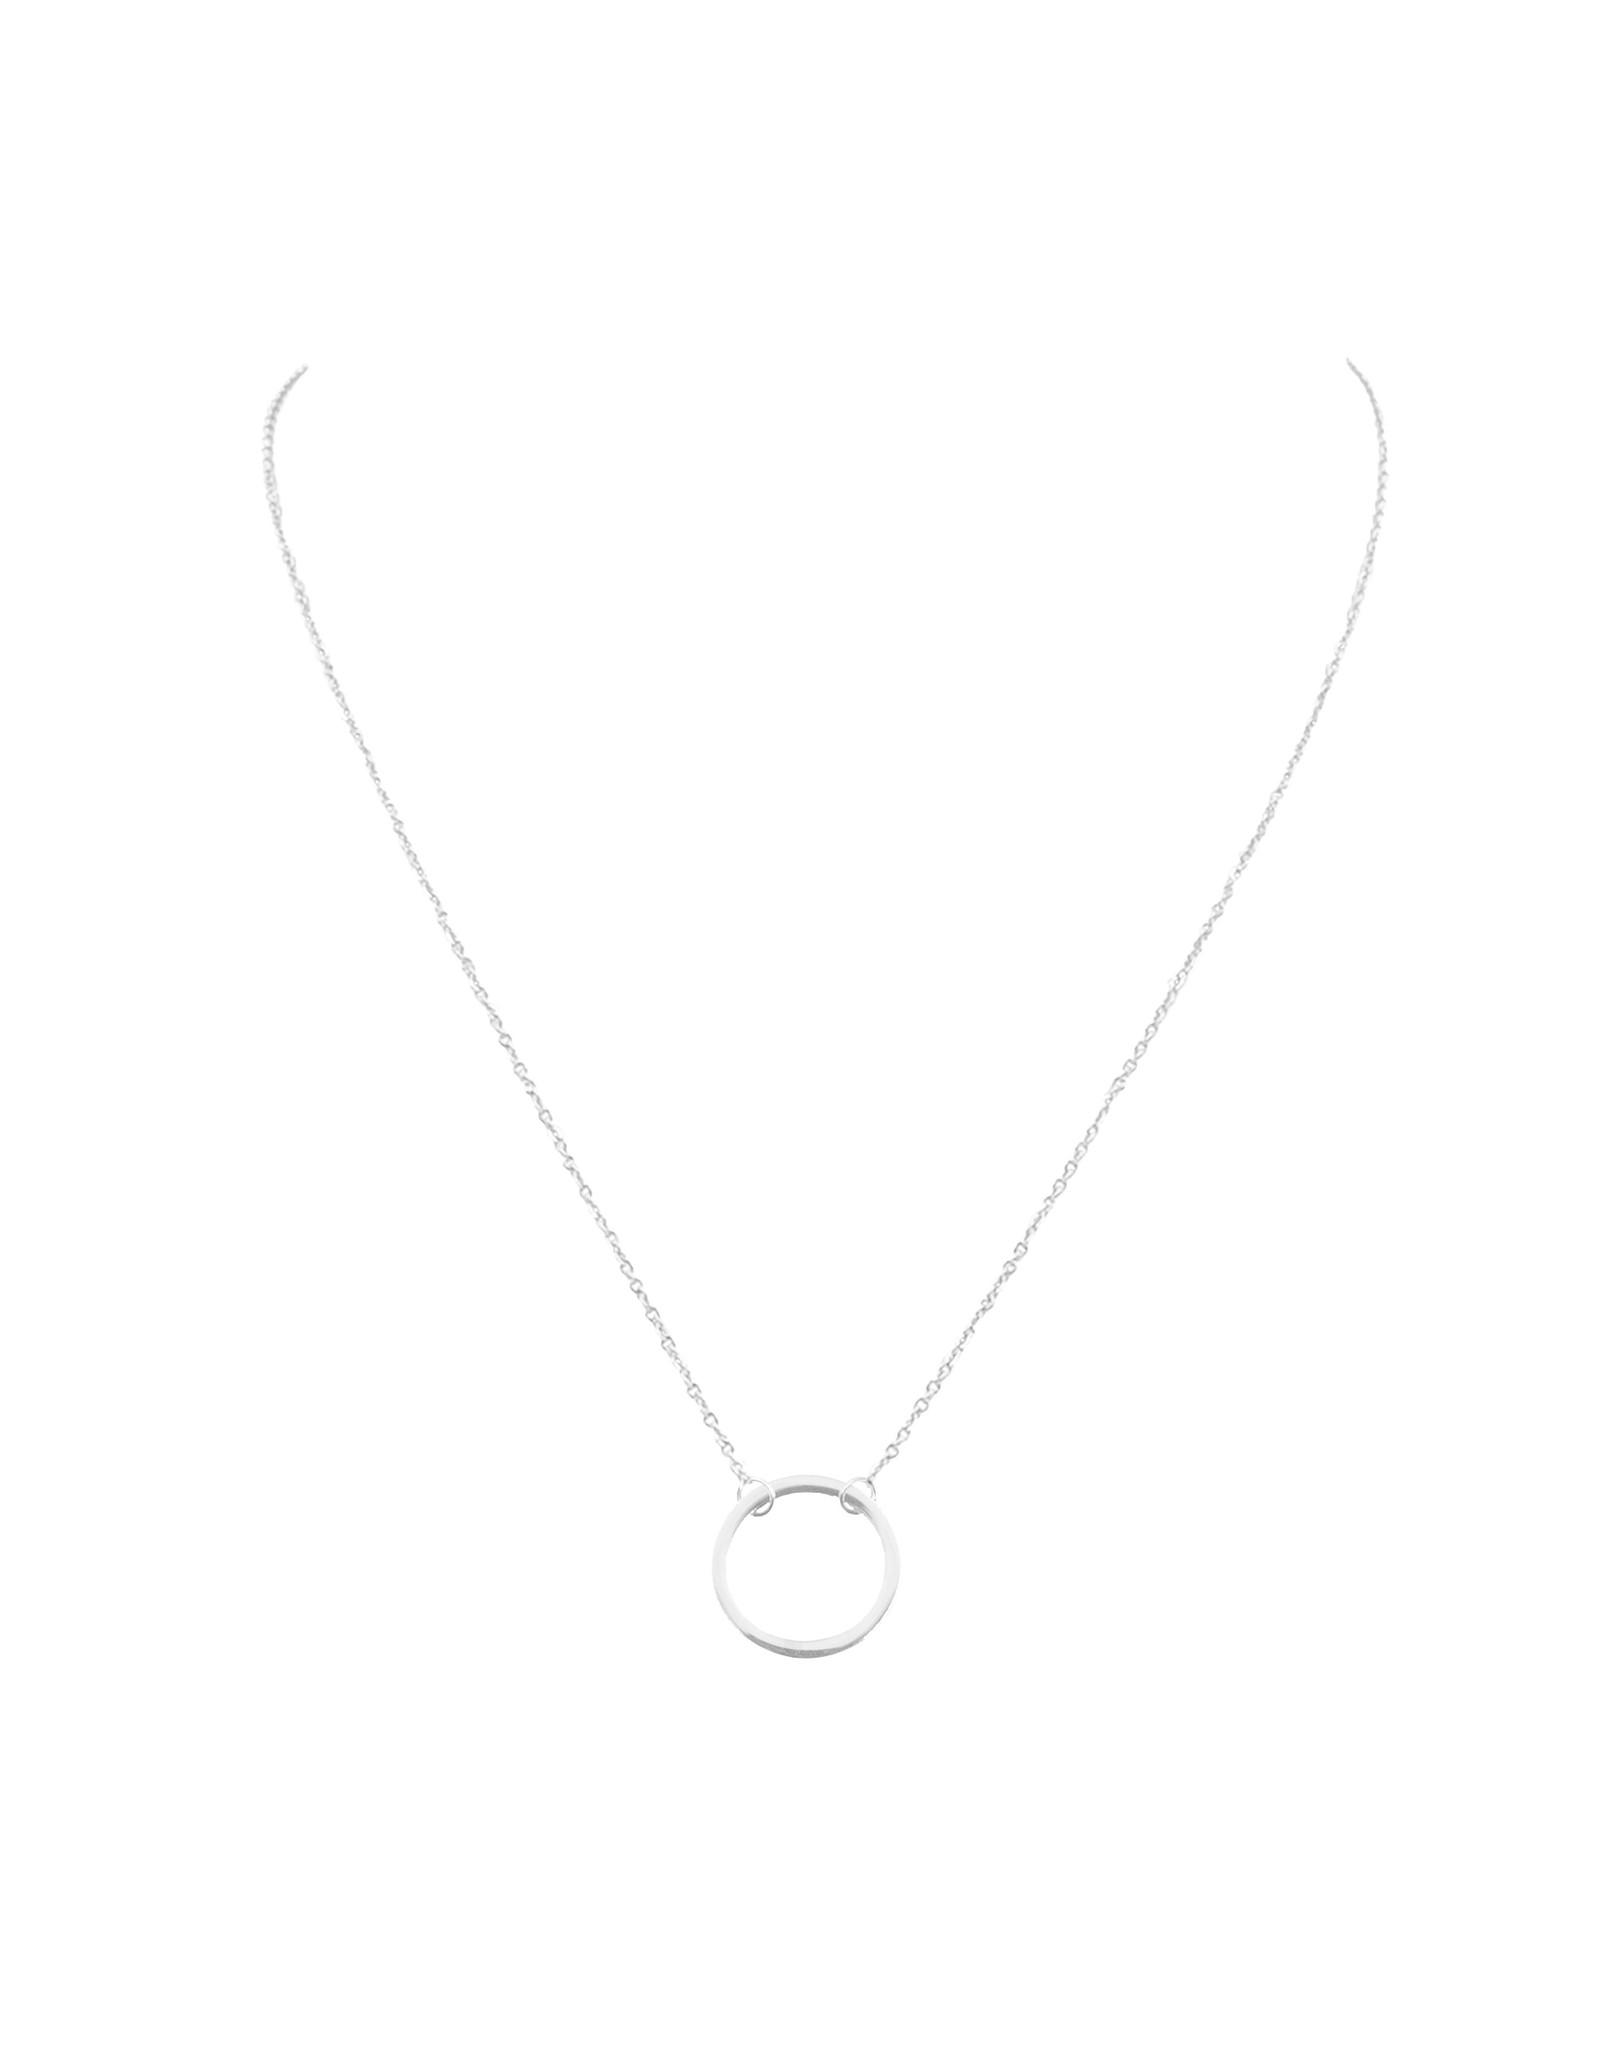 Kinsley Armelle Goddess Collection - Silver Honey Necklace - 18 inches